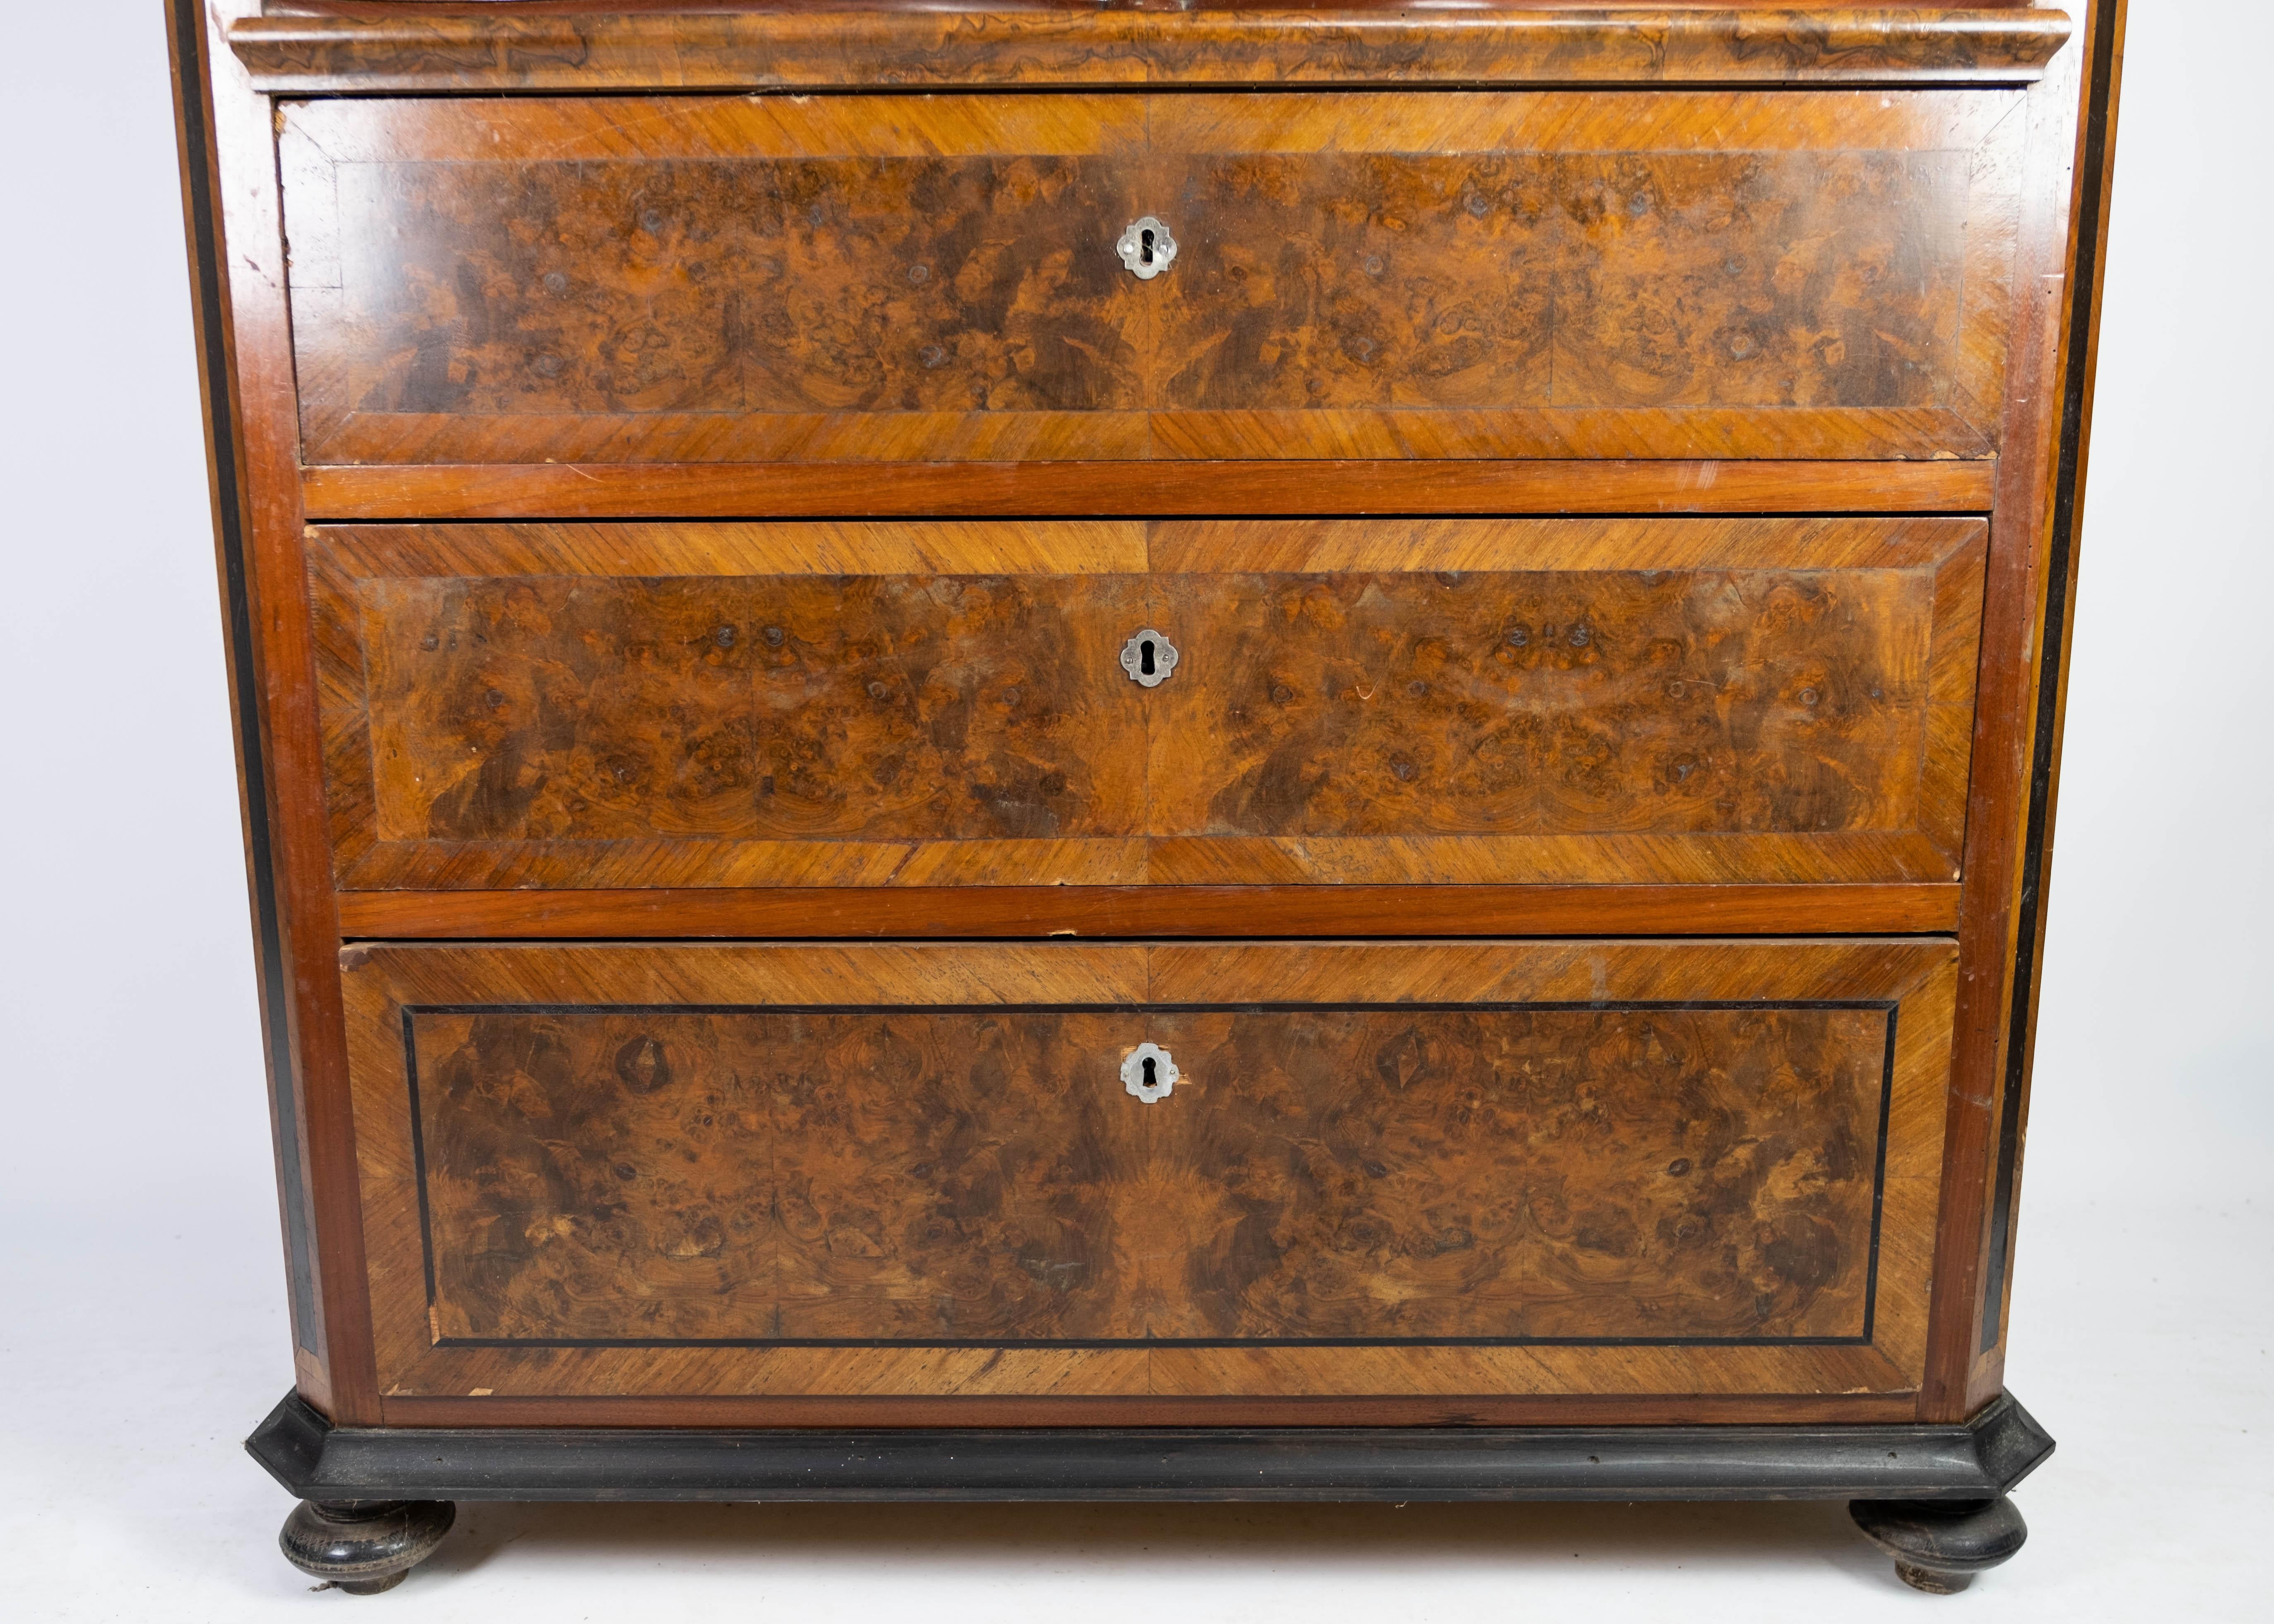 Danish Large Cabinet of Polished Mahogany and Walnut, in Great Antique Condition, 1880